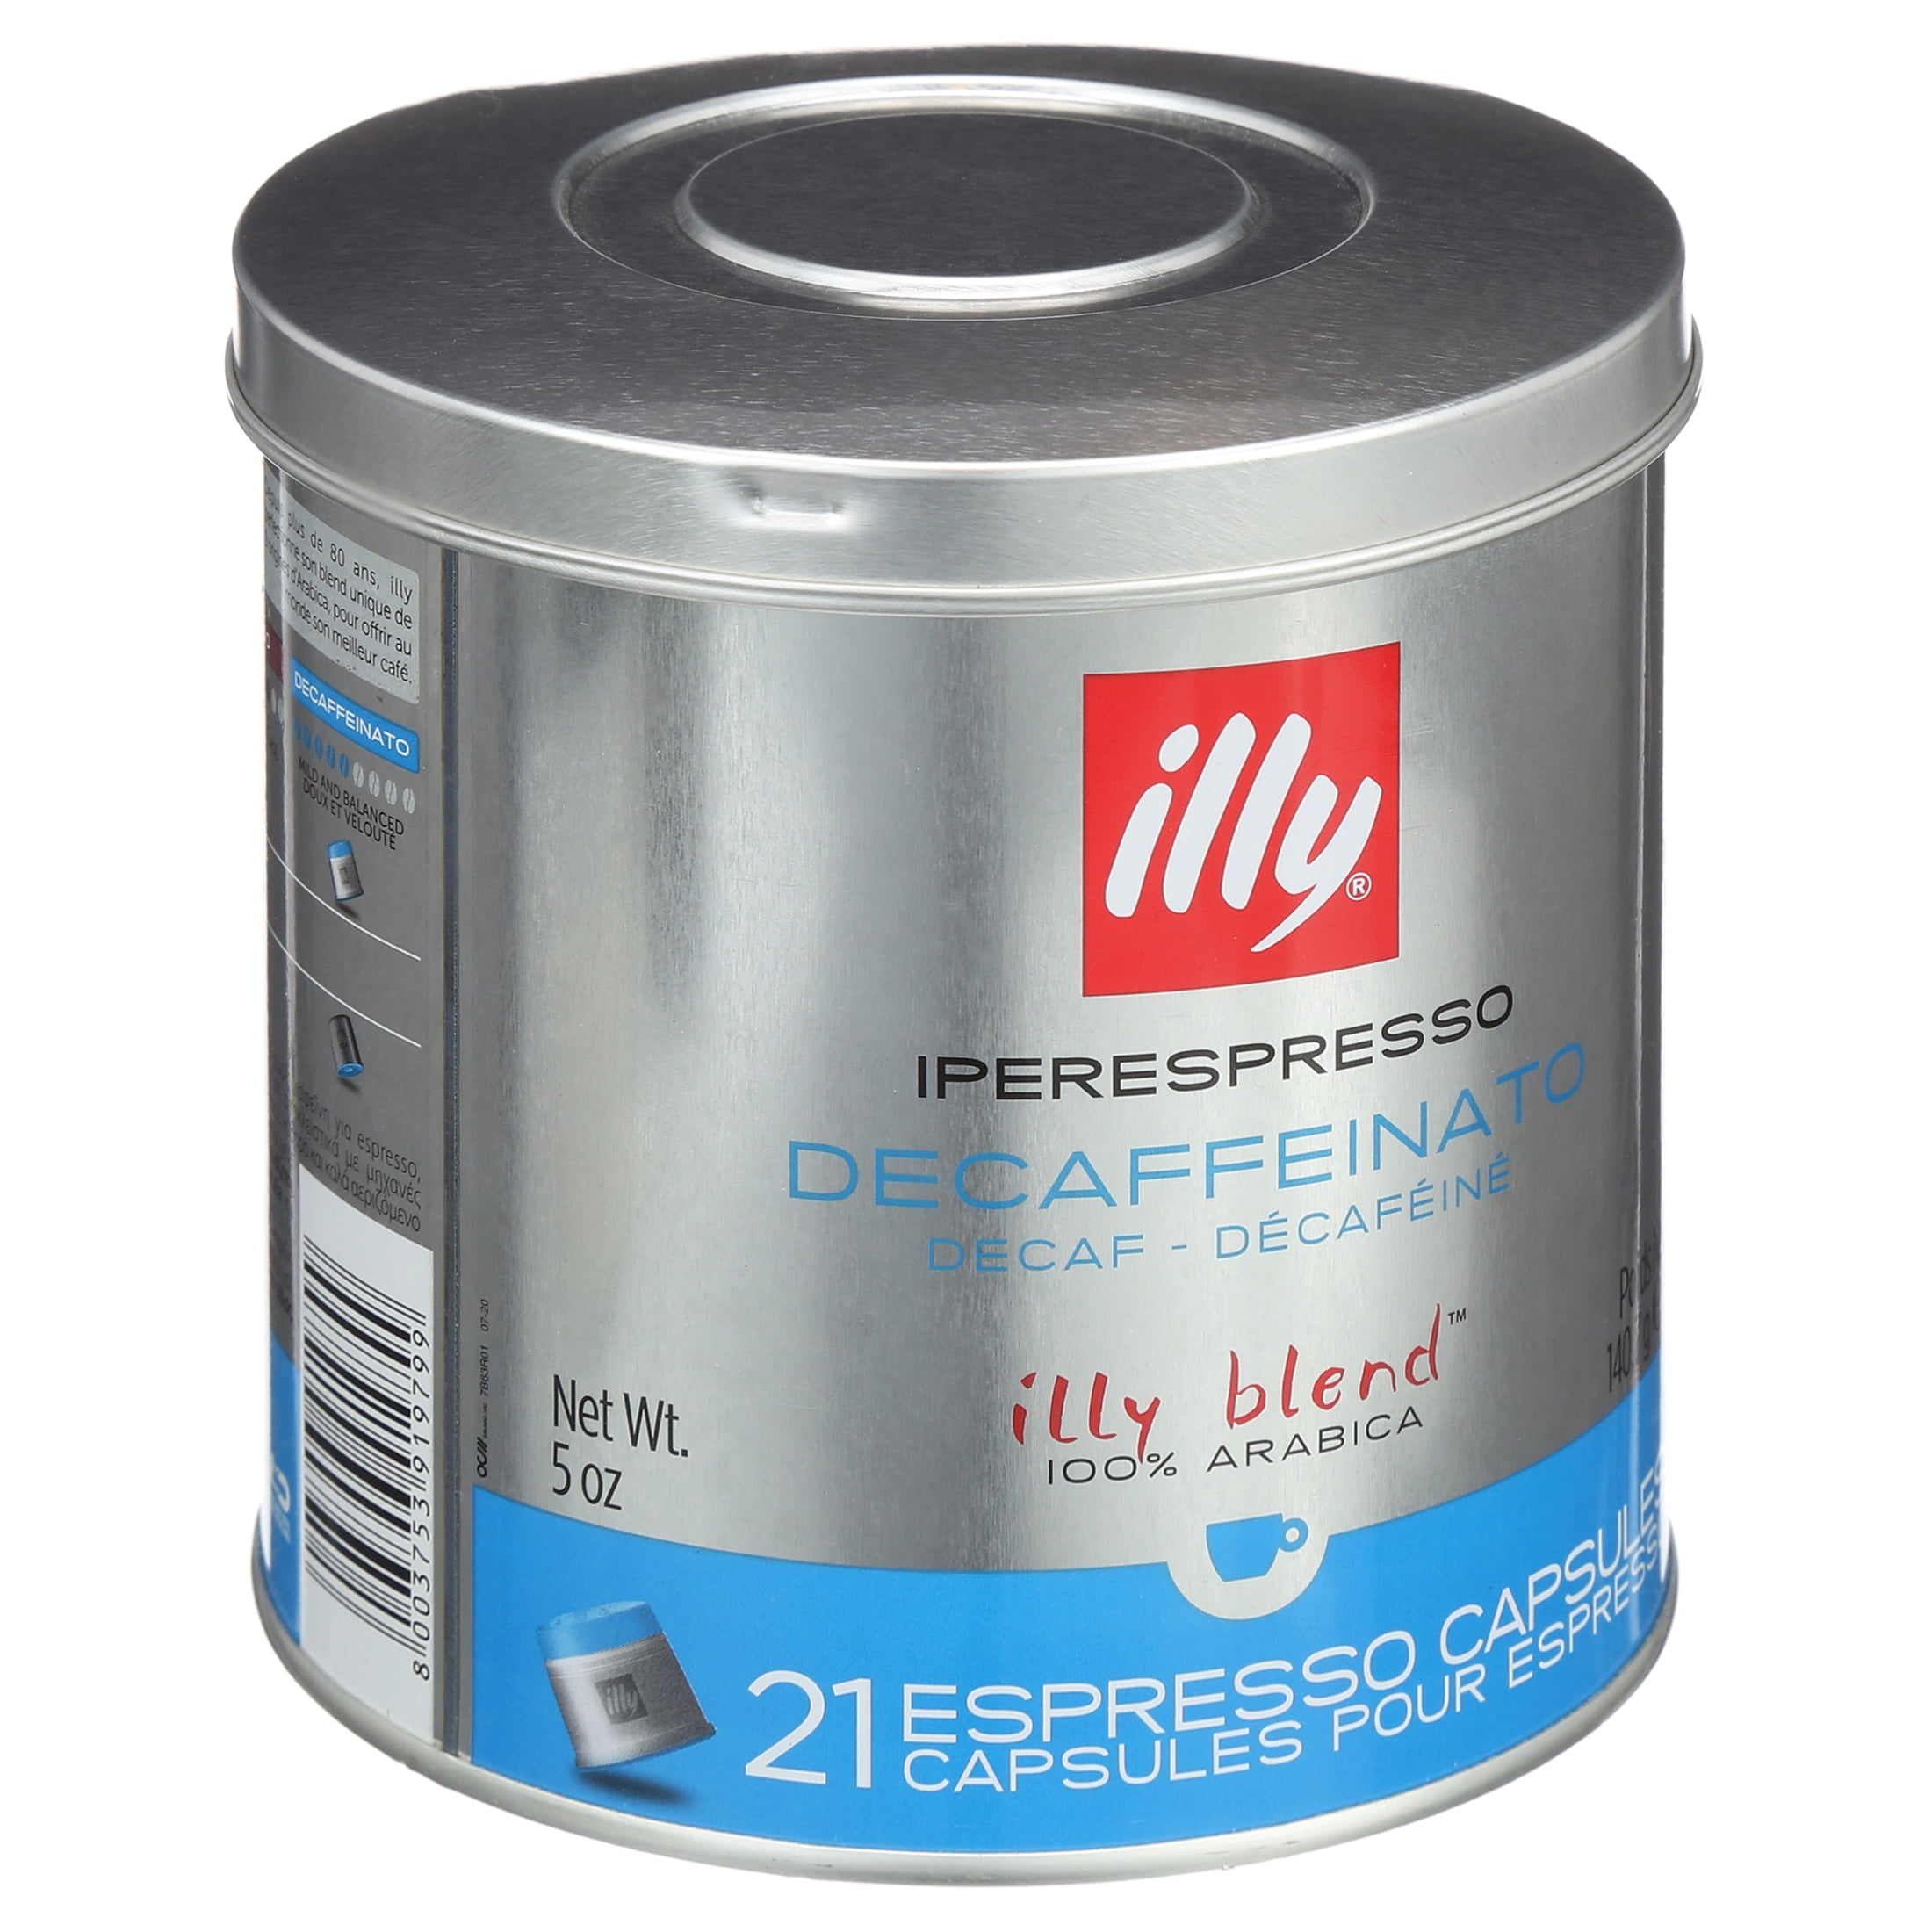  illy Coffee iperEspresso Capsules - Single-Serve Coffee  Capsules & Pods - Single Origin Coffee Pods – Intenso Dark Roast with Notes  of Cocoa & Fruit - For iperEspresso Capsule Machines – 18 Count :  Everything Else